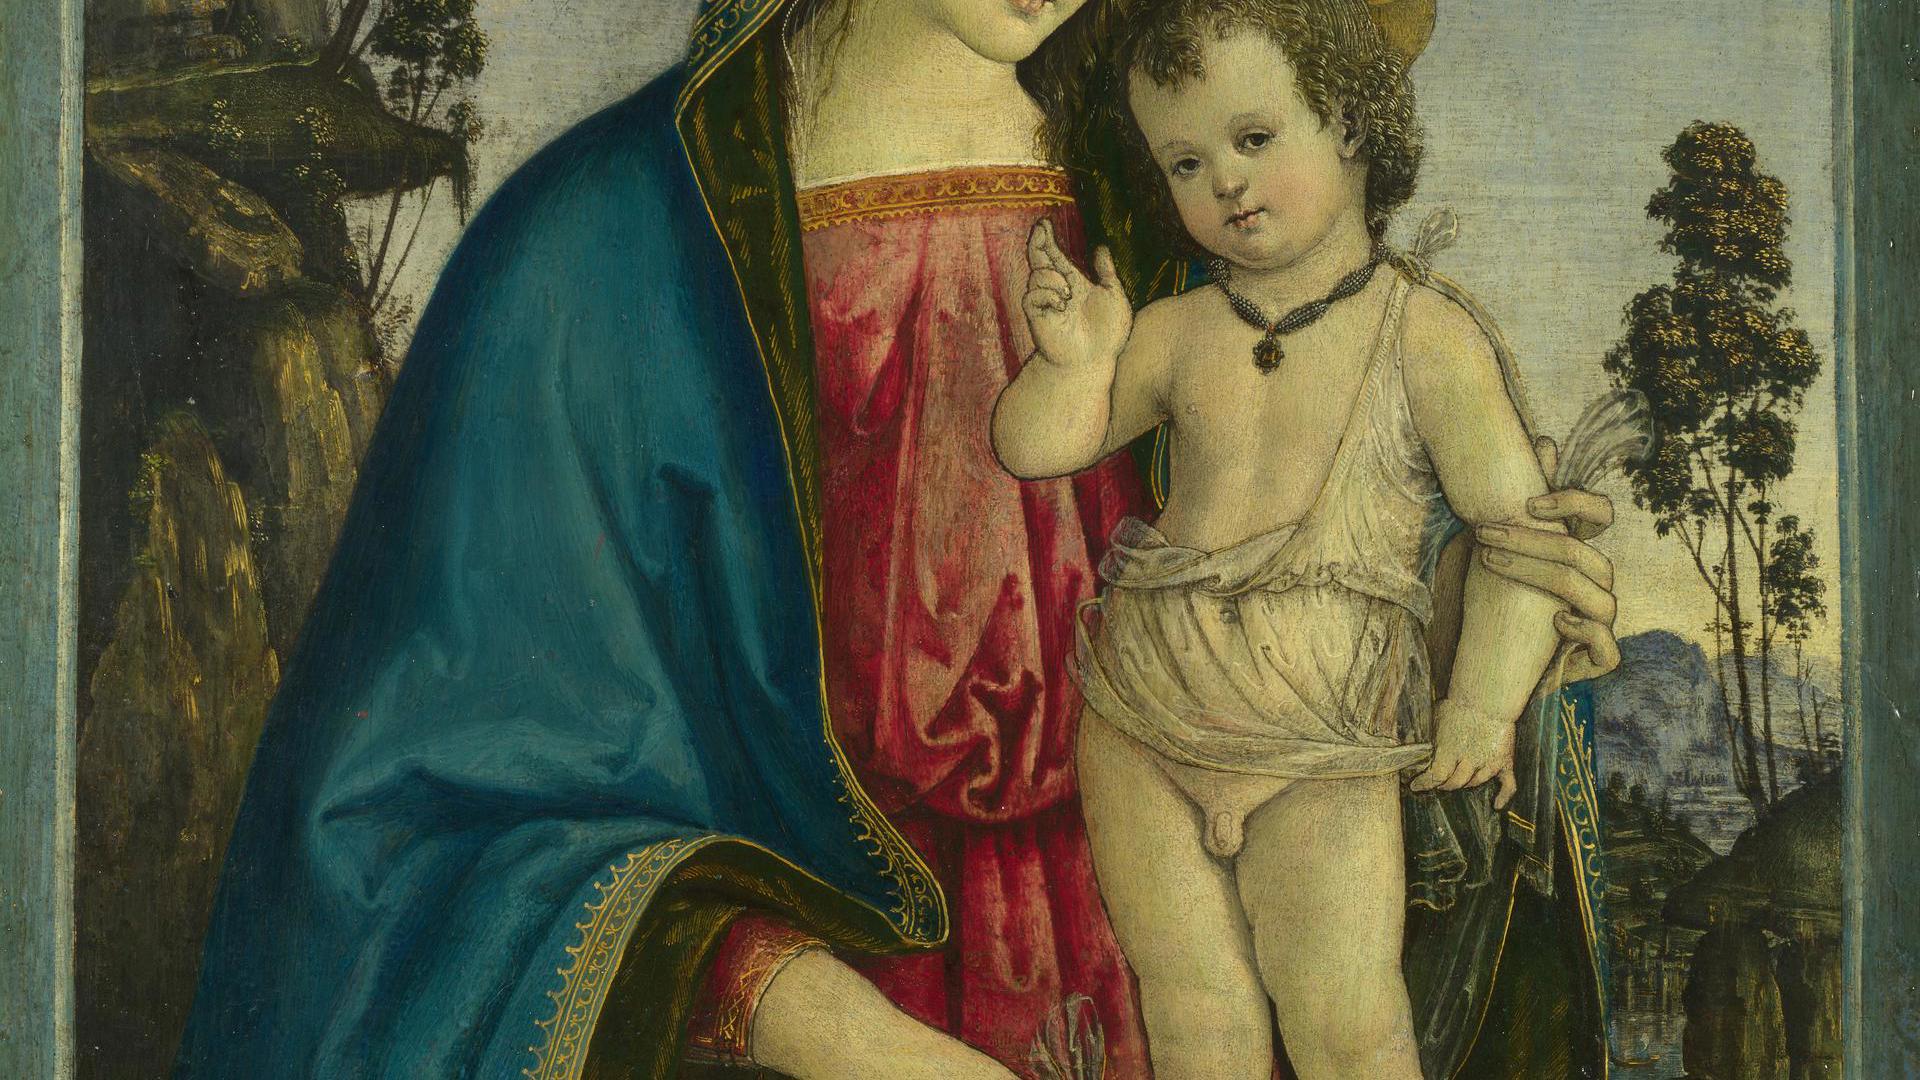 The Virgin and Child by Pintoricchio